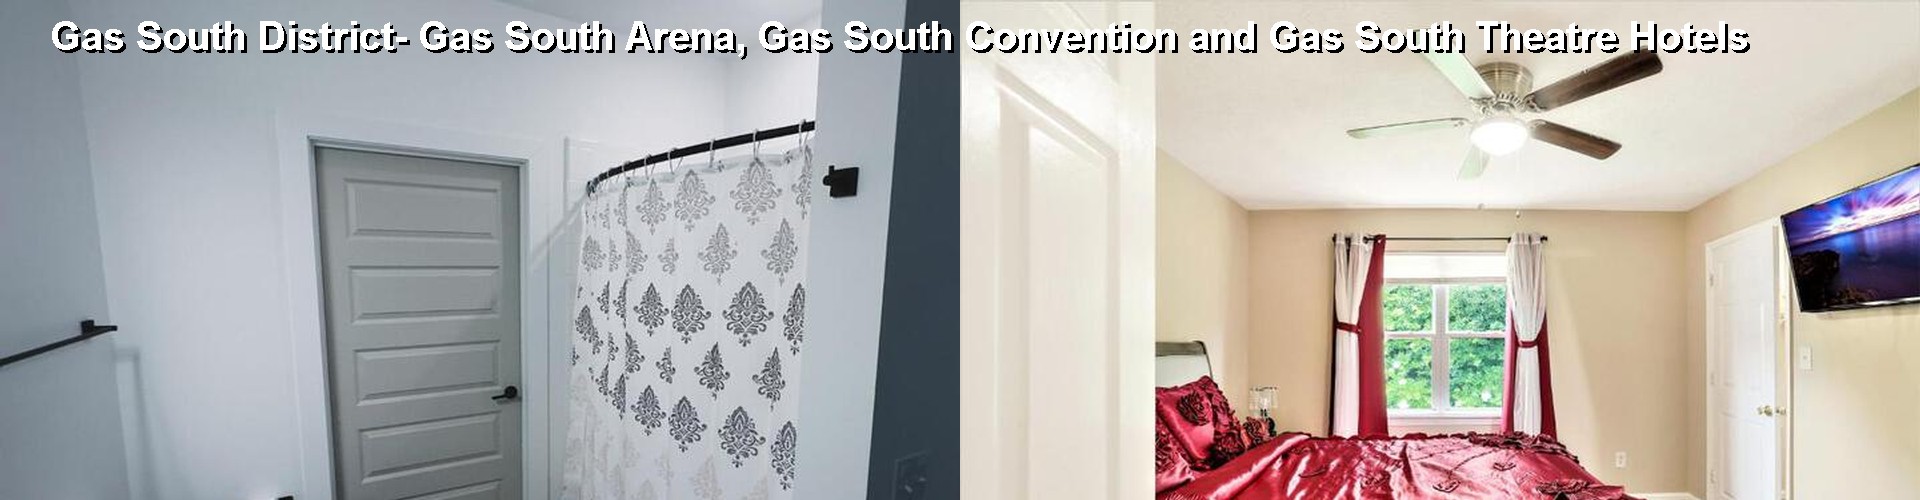 5 Best Hotels near Gas South District- Gas South Arena, Gas South Convention and Gas South Theatre